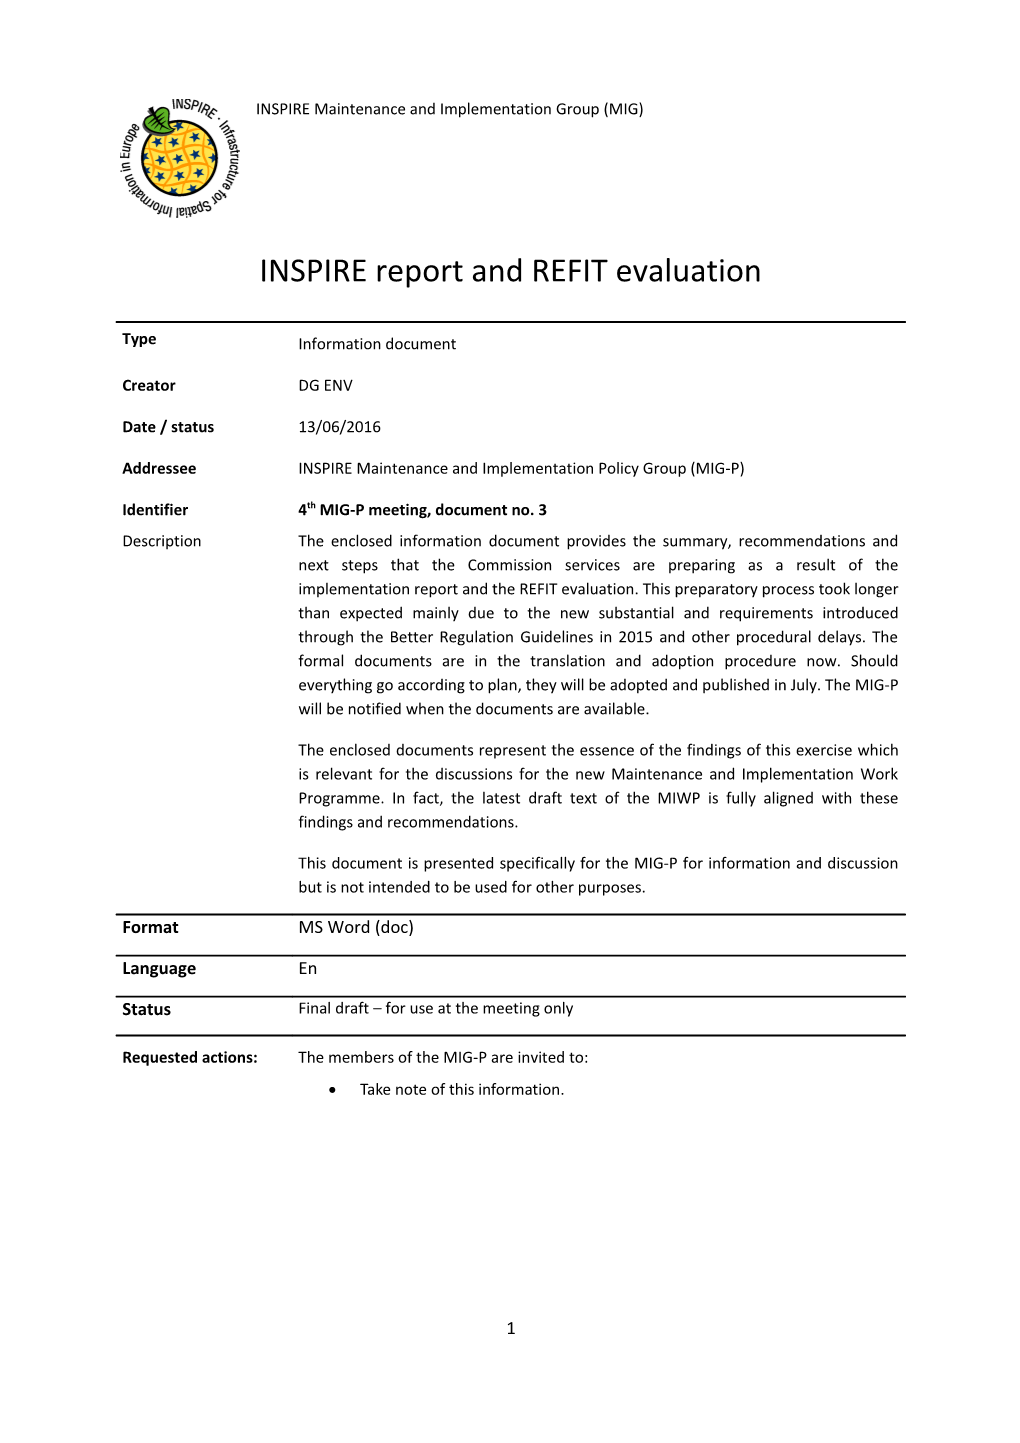 INSPIRE Report and REFIT Evaluation